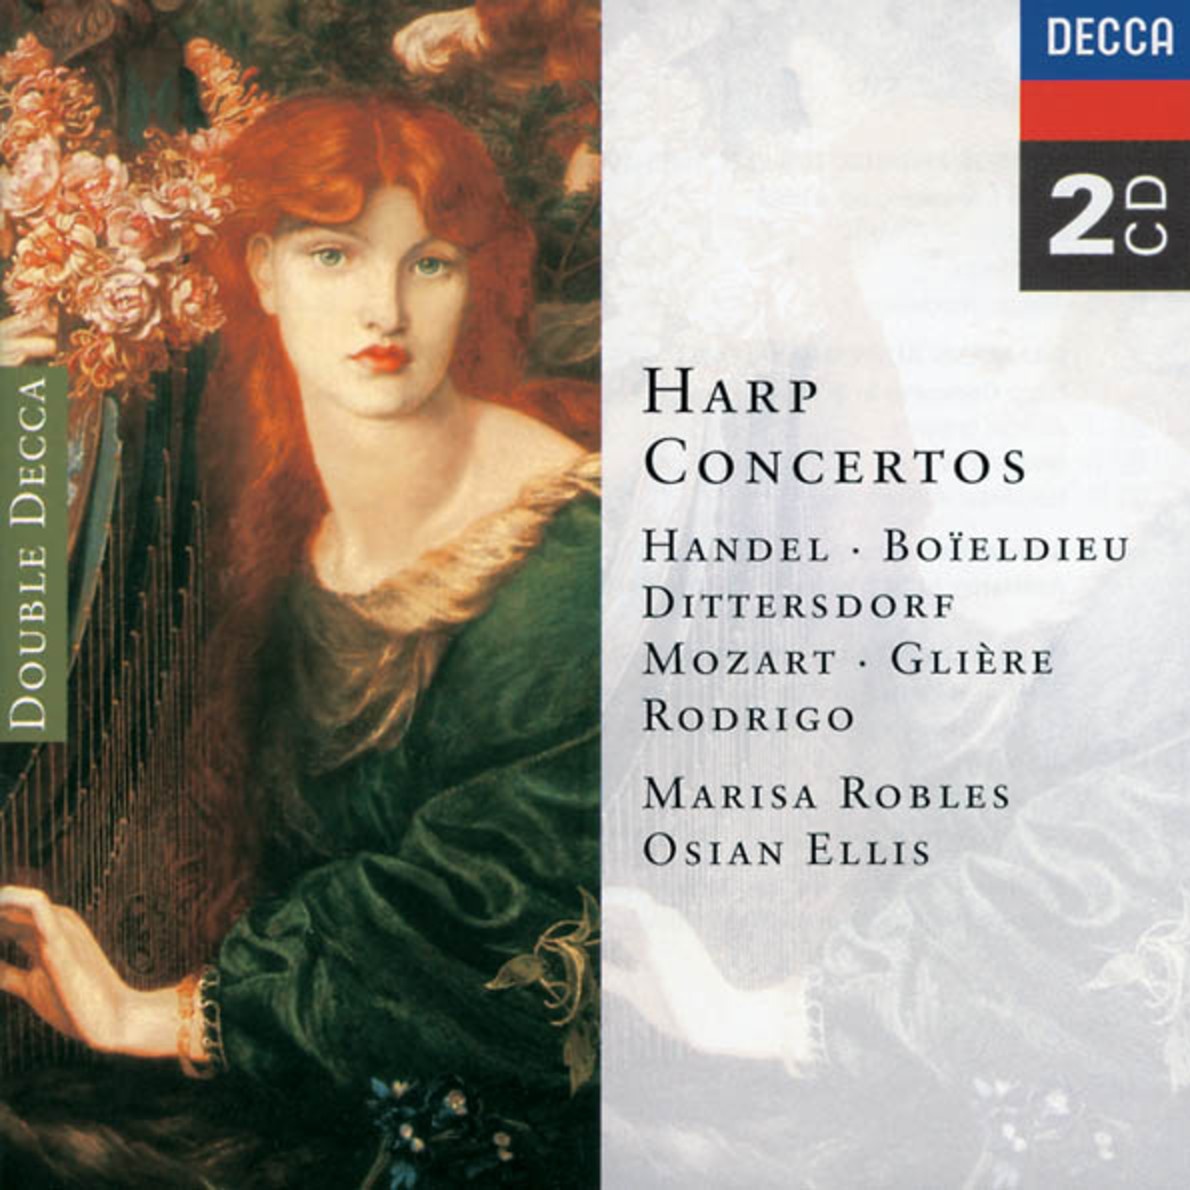 Mozart: Concerto for Flute, Harp, and Orchestra in C, K.299 - 1. Allegro